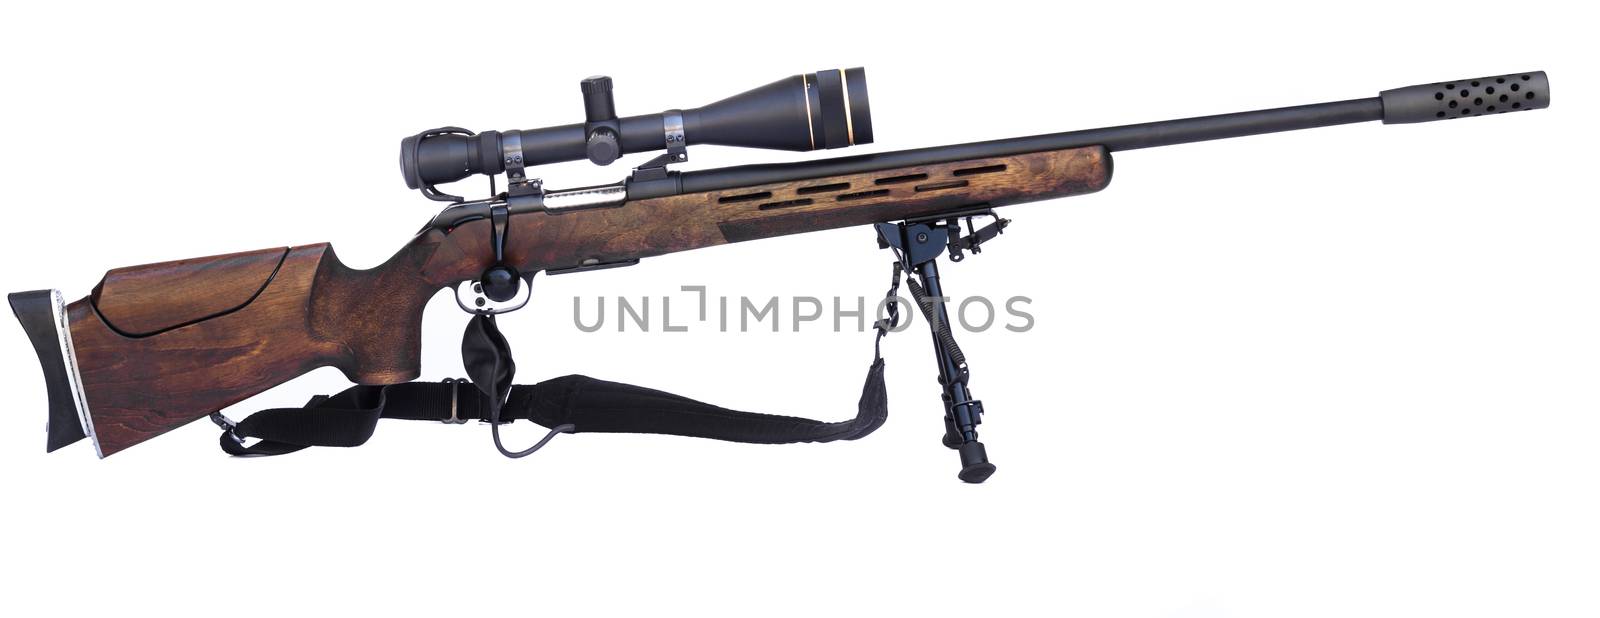 Sniper Rifle by orcearo